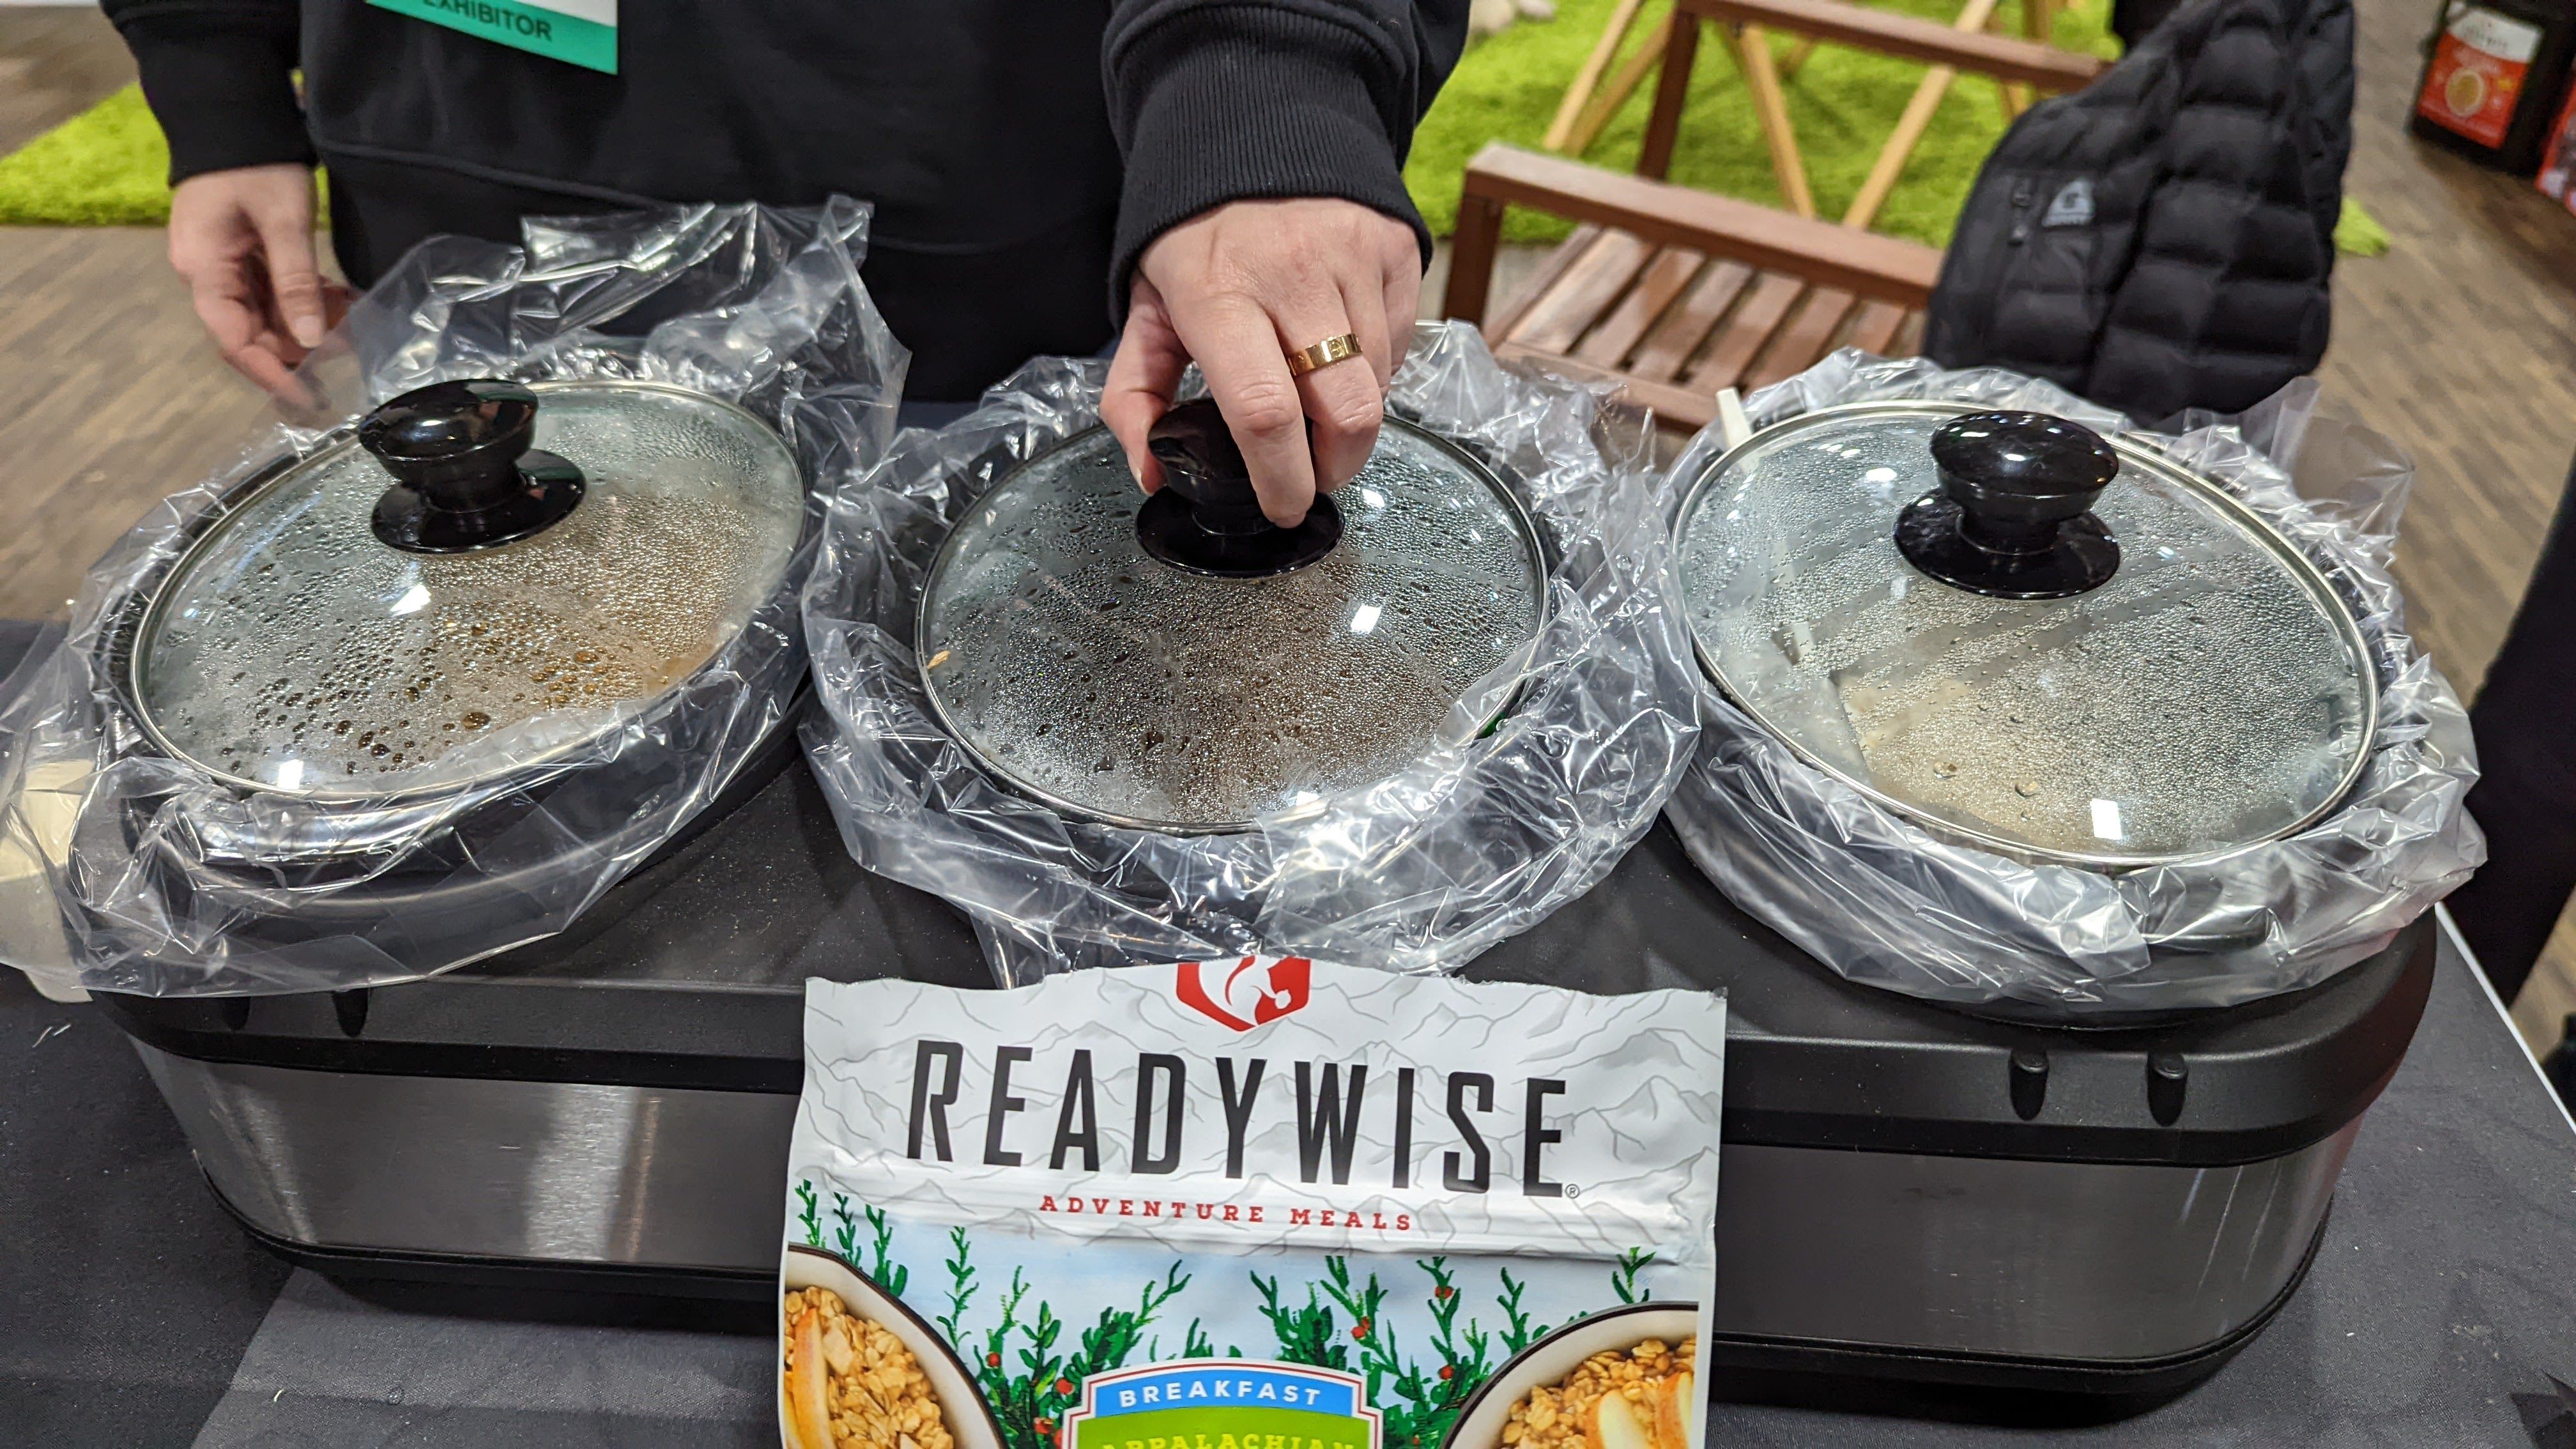 Food is in warming dishes next to a "ReadyWise" backpacker meal package.